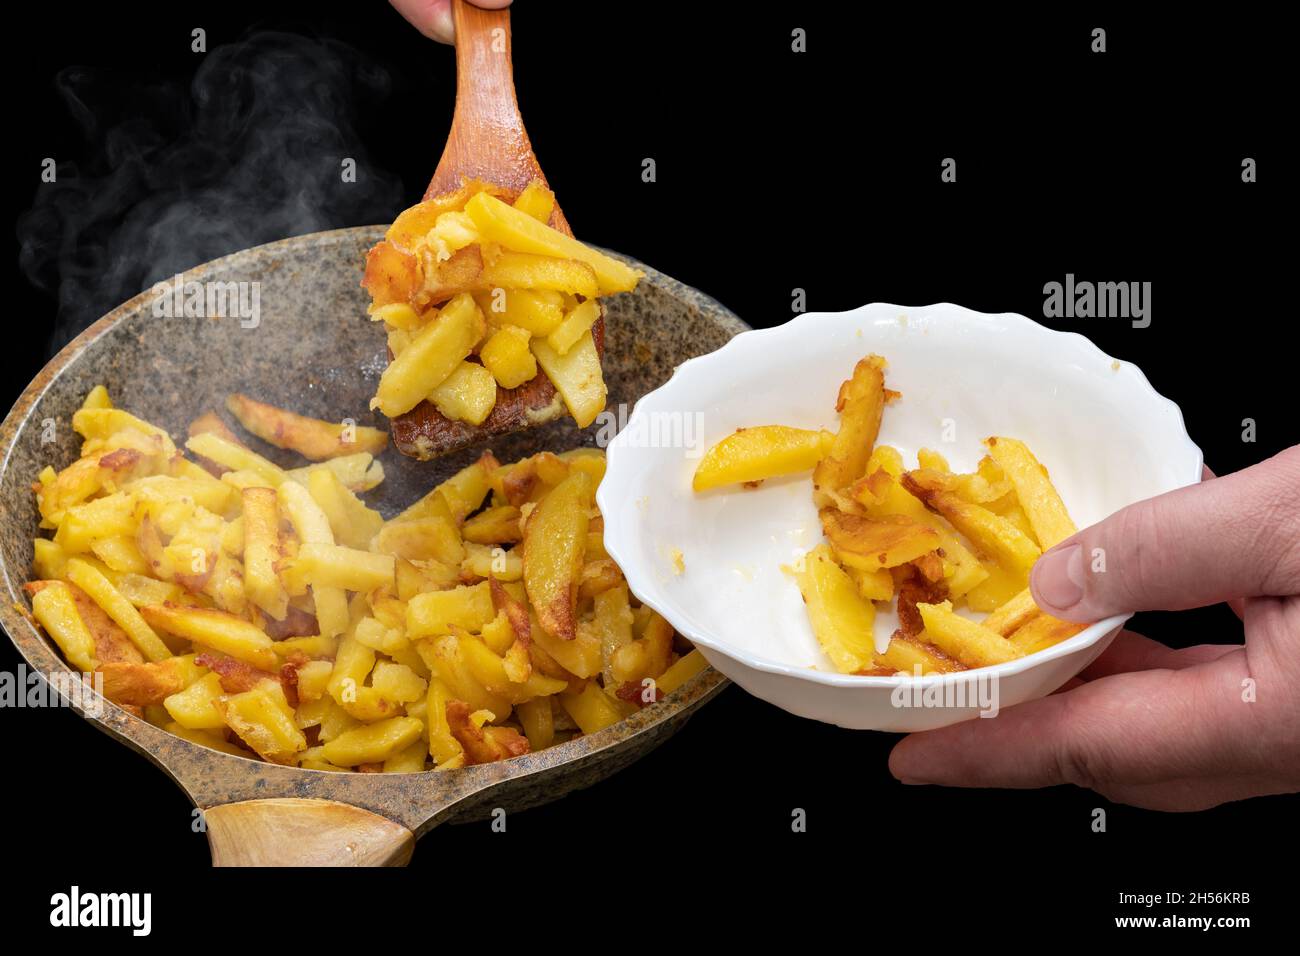 Hand of the chef putting delicious crispy golden hot fried potato wedges into a white plate with a wooden spatula close-up. Delicious homemade food. A Stock Photo